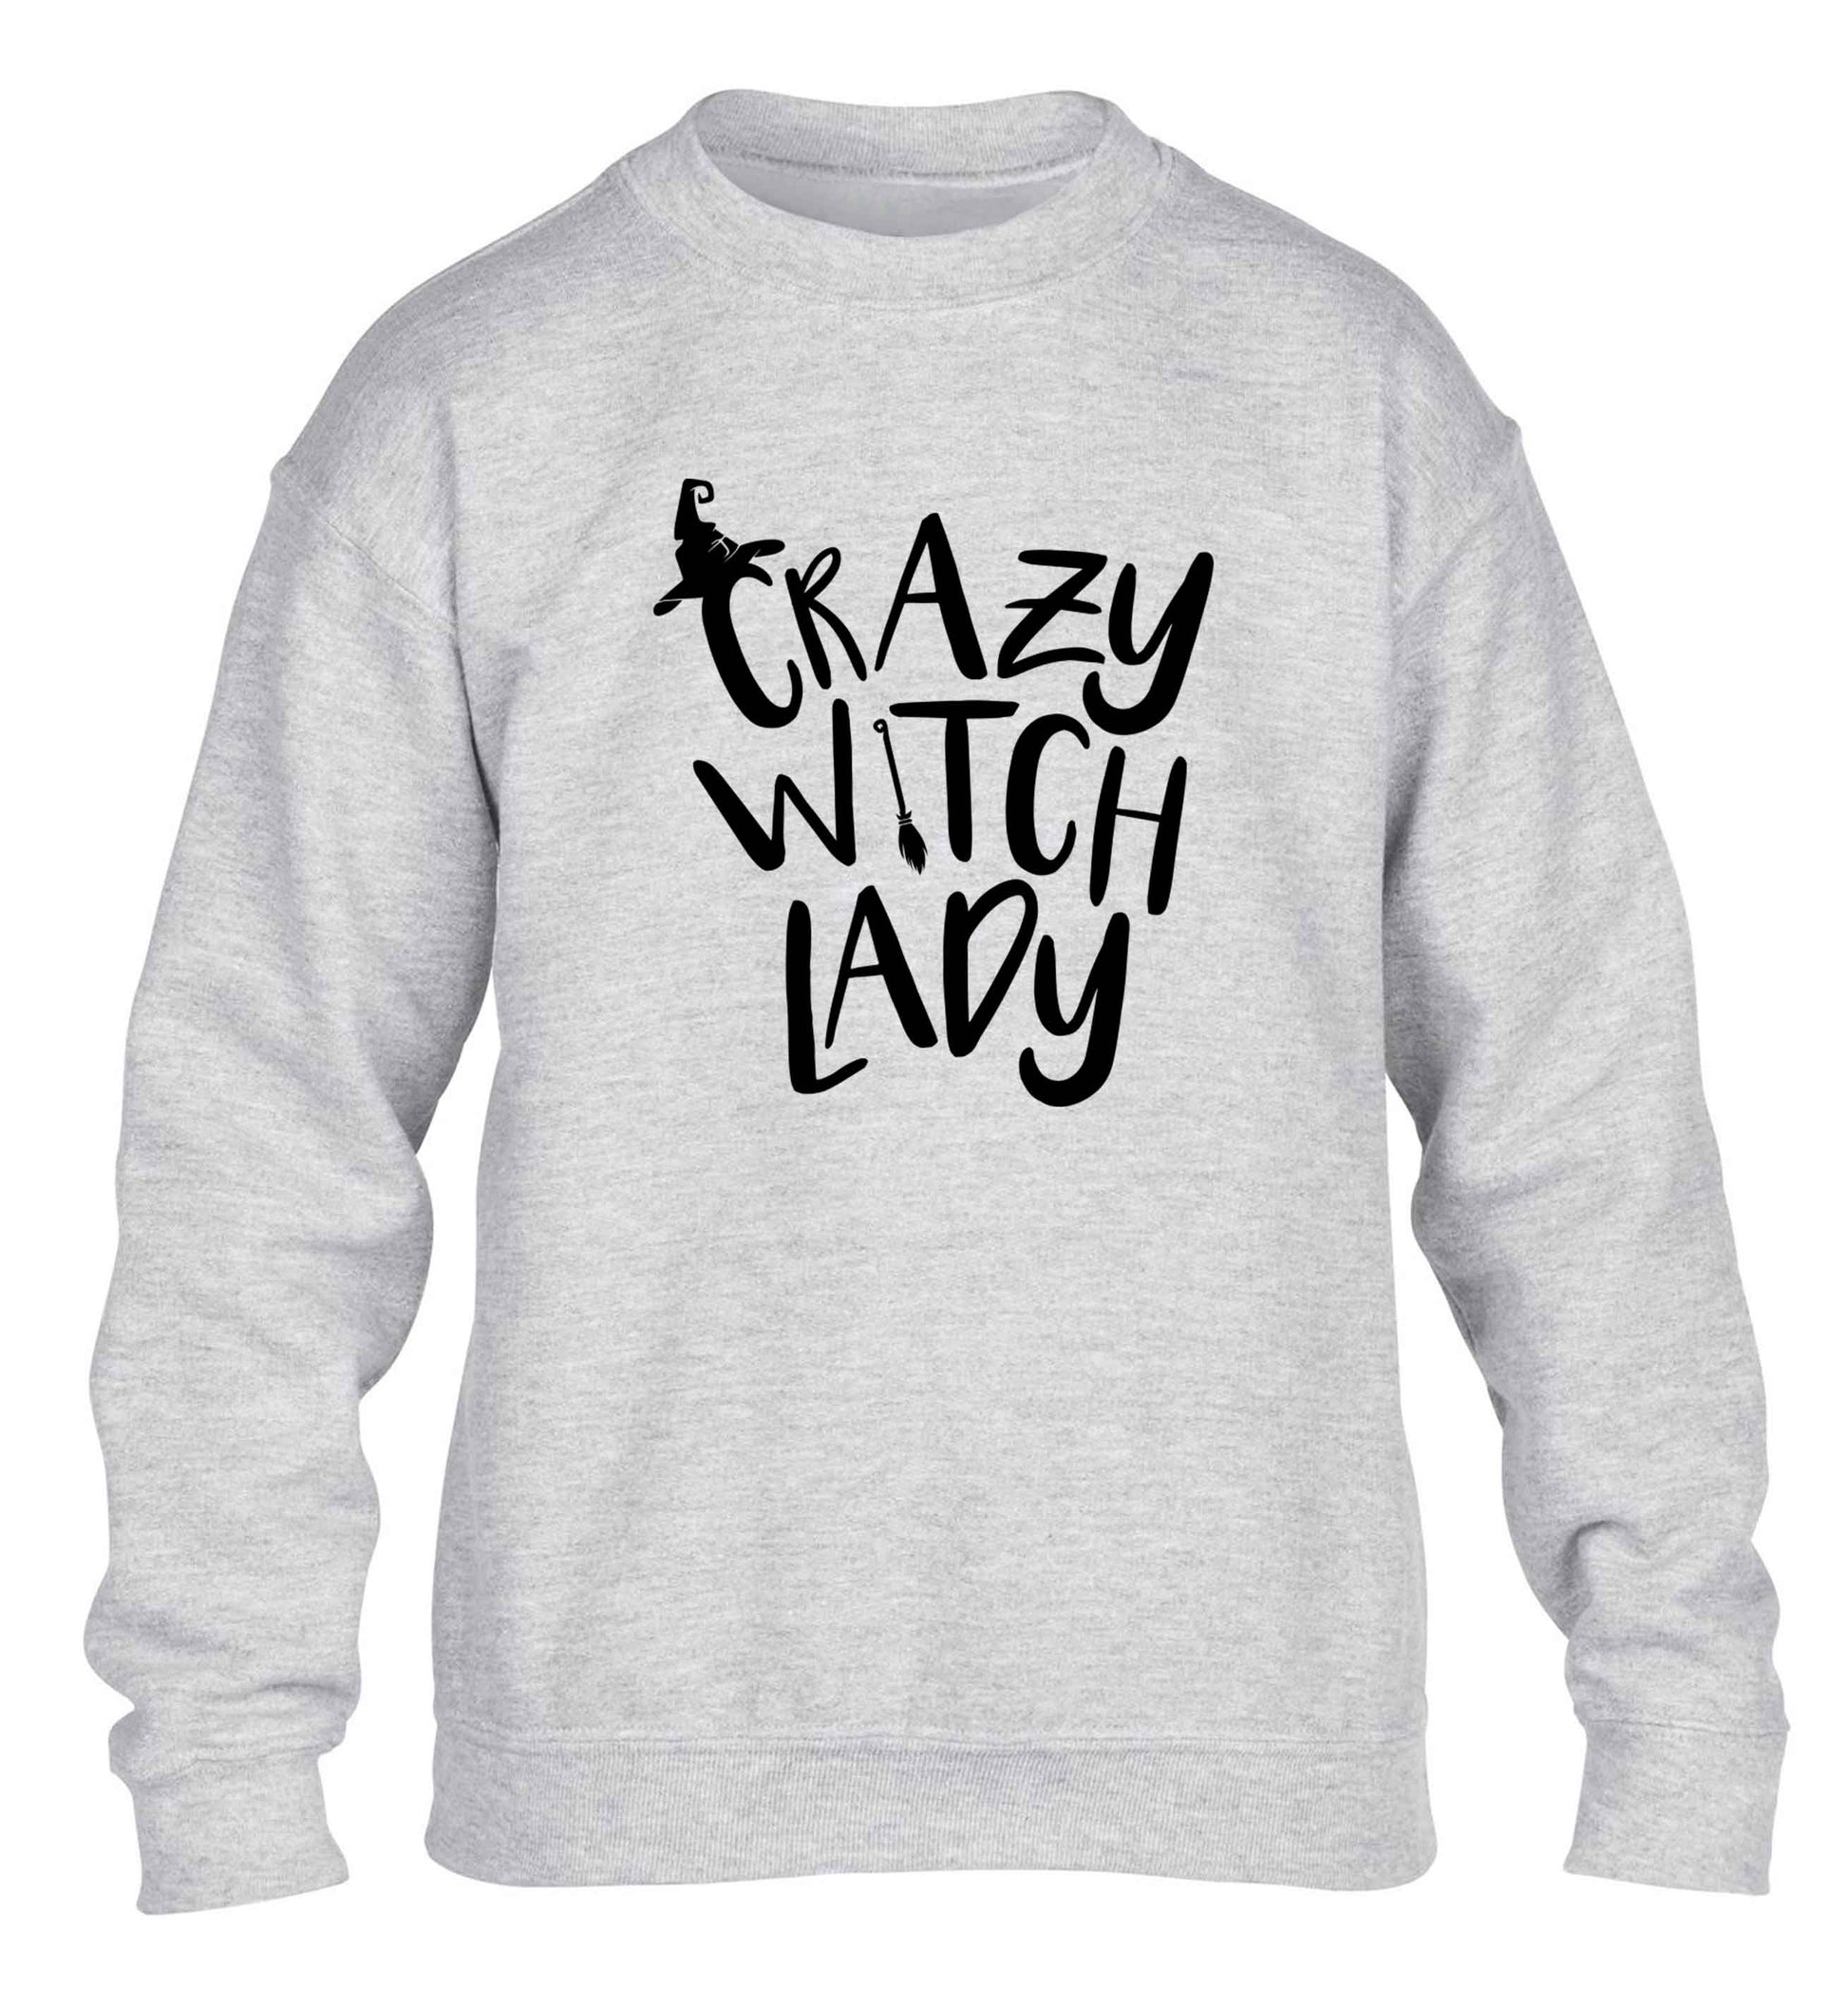 Crazy witch lady children's grey sweater 12-13 Years